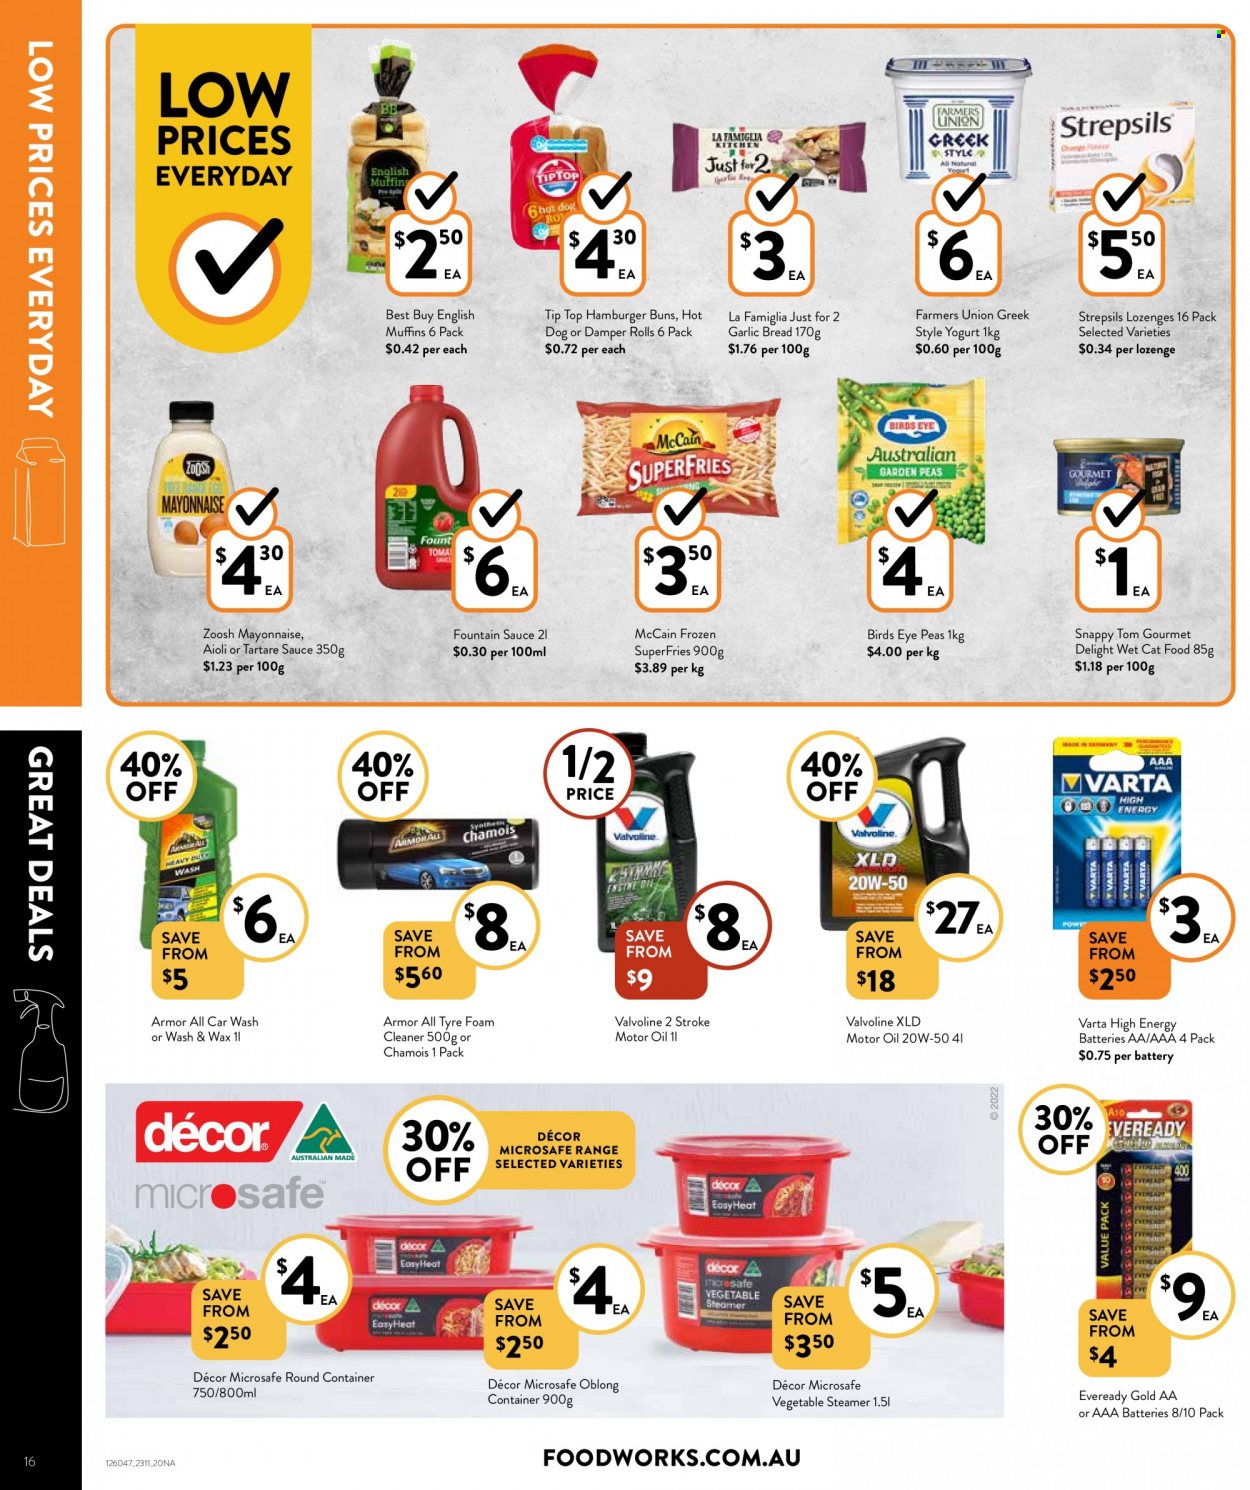 thumbnail - Foodworks Catalogue - 23 Nov 2022 - 29 Nov 2022 - Sales products - bread, english muffins, Tip Top, buns, burger buns, peas, hot dog, sauce, Bird's Eye, yoghurt, McCain, potato fries, ZoOsh, oil, cleaner, container, battery, Varta, AAA batteries, Eveready, animal food, cat food, wet cat food, Strepsils. Page 16.